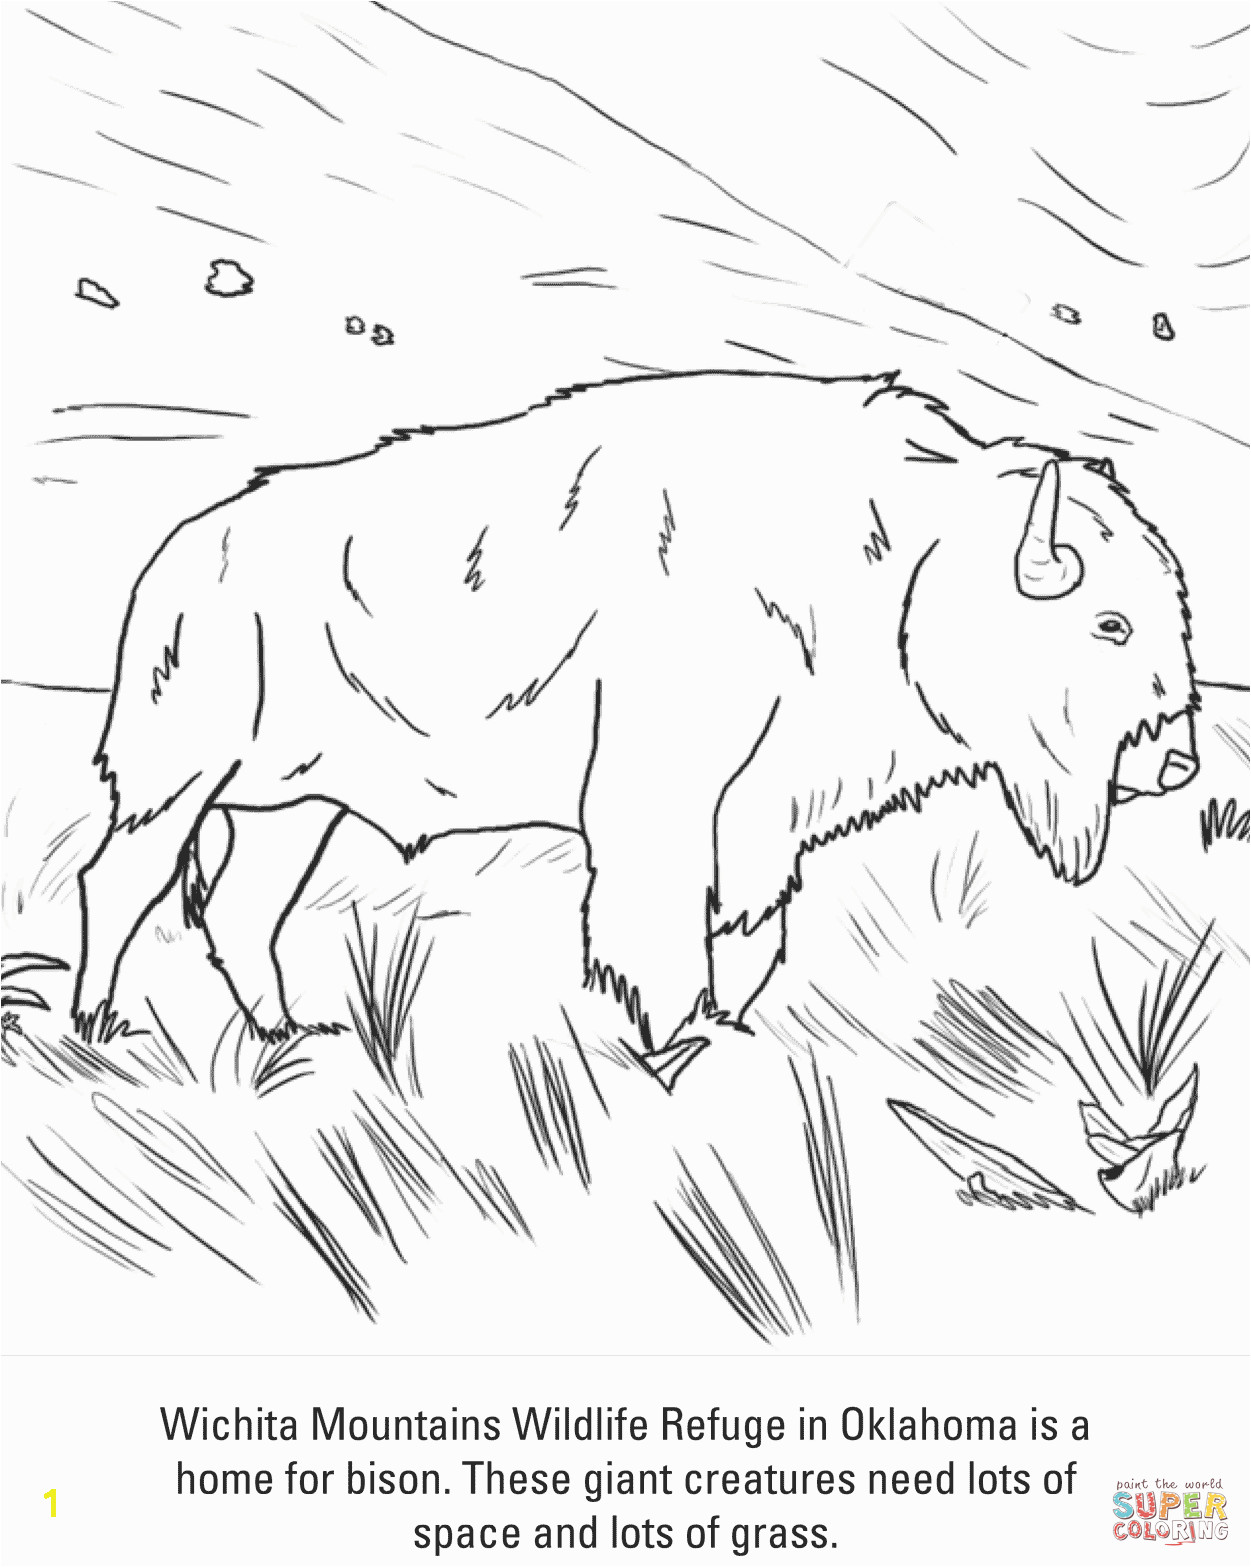 bison coloring page free printable coloring pagesclick the bison coloring pages to view printable version or